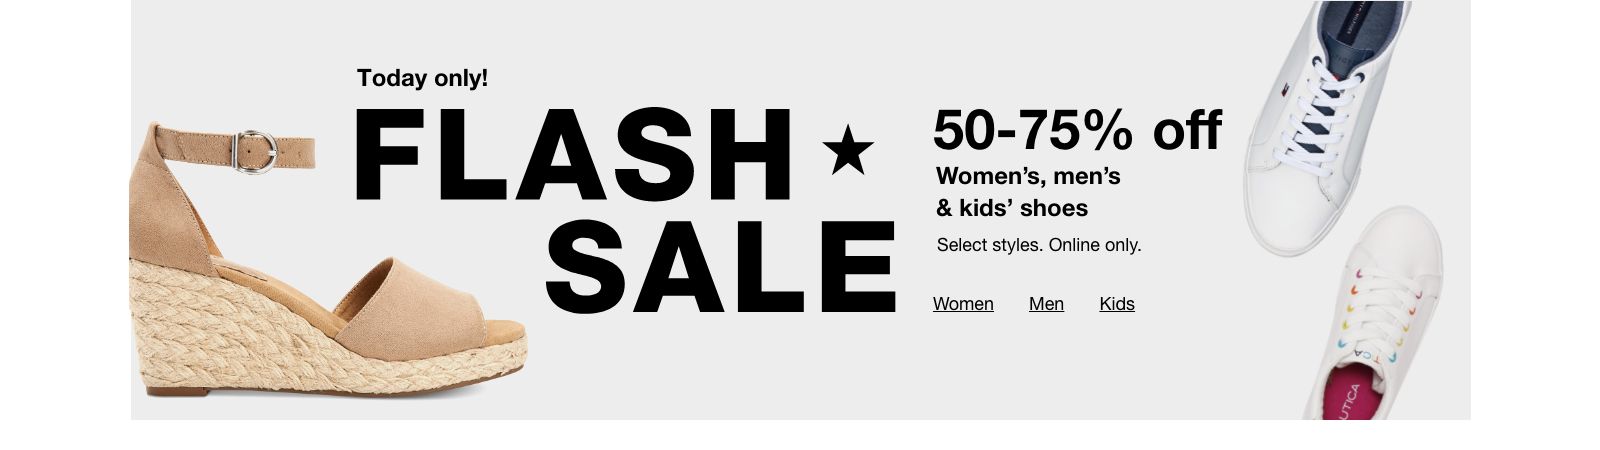 MACY’S- FLASH SALE 50-75% OFF! TODAY ONLY! | Bomb Deals